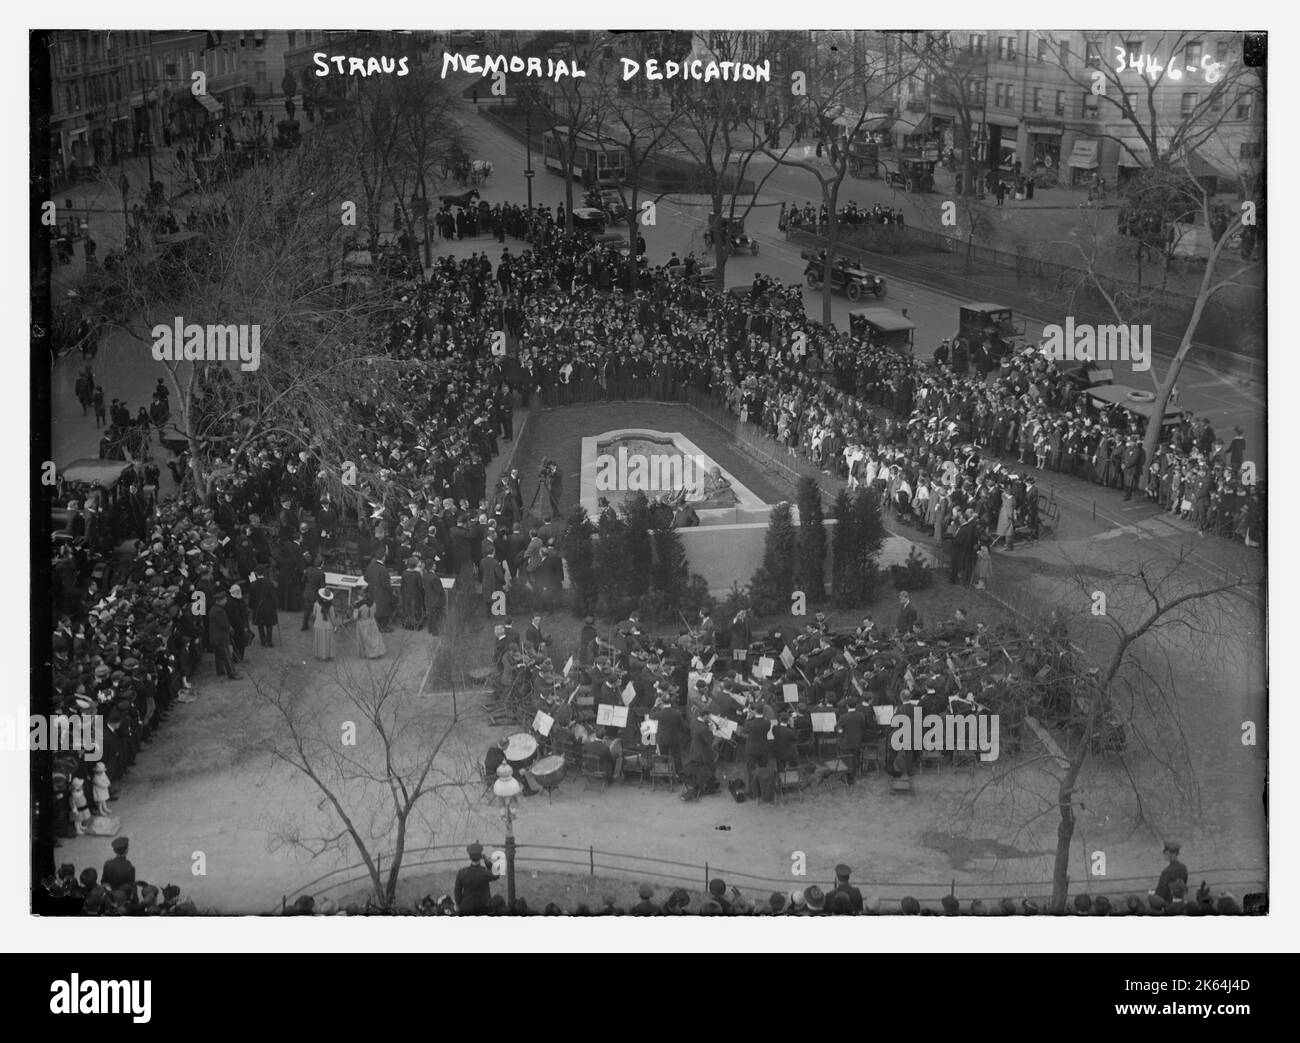 Educator Seth Low (1850-1916) at the dedication of Straus Memorial Park in New York City on April 15, 1915, the third anniversary of the death of Isidore and Ida Straus on the Titanic.     Date: 1915 Stock Photo